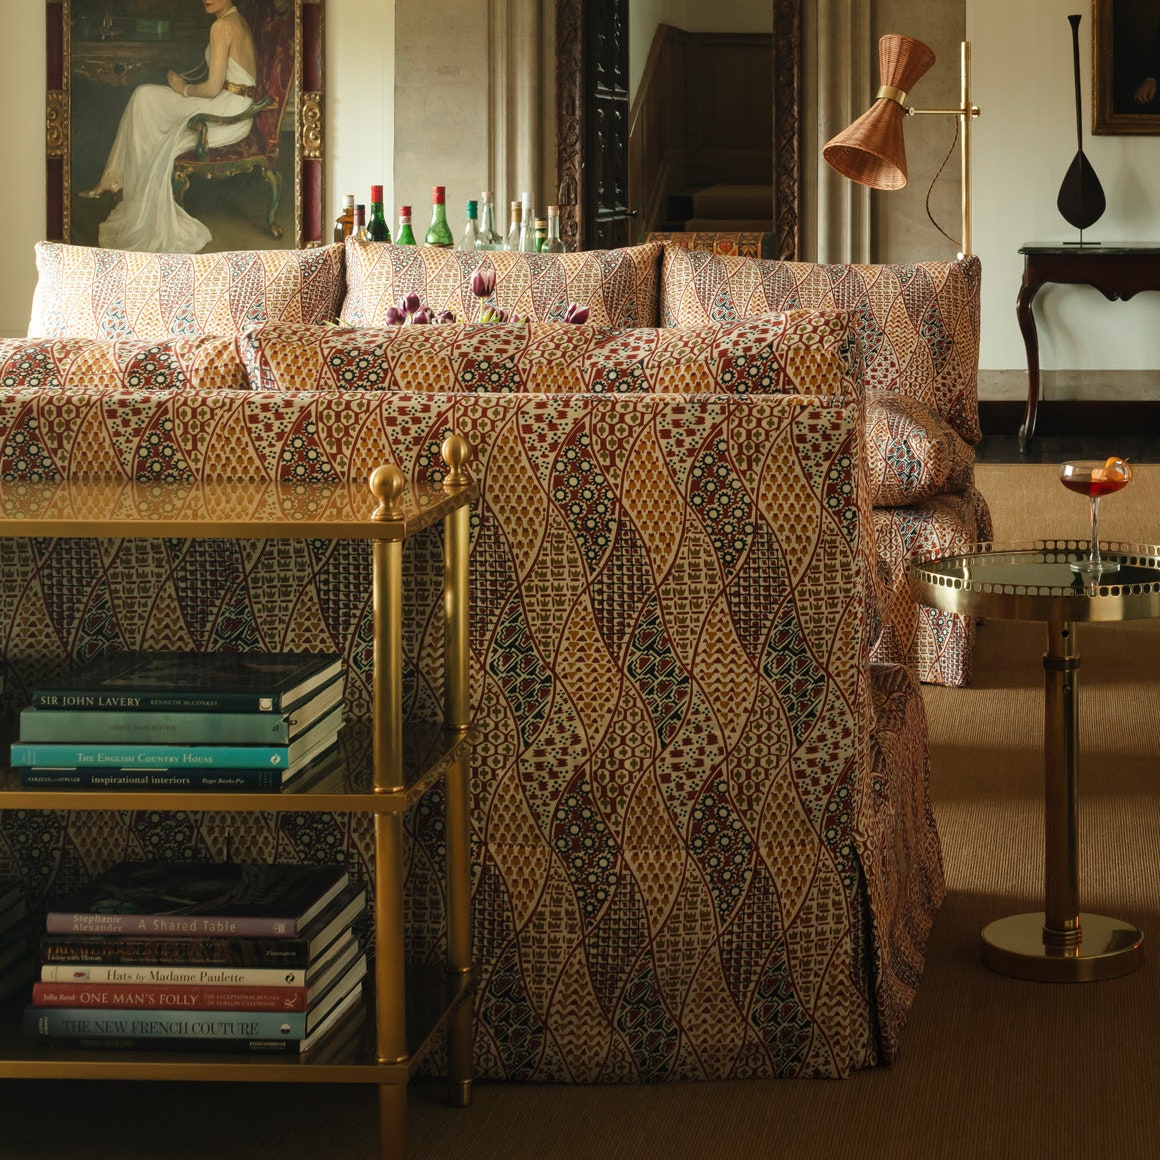 Adam Bray and Soane collaborate on a collection of four new fabric designs